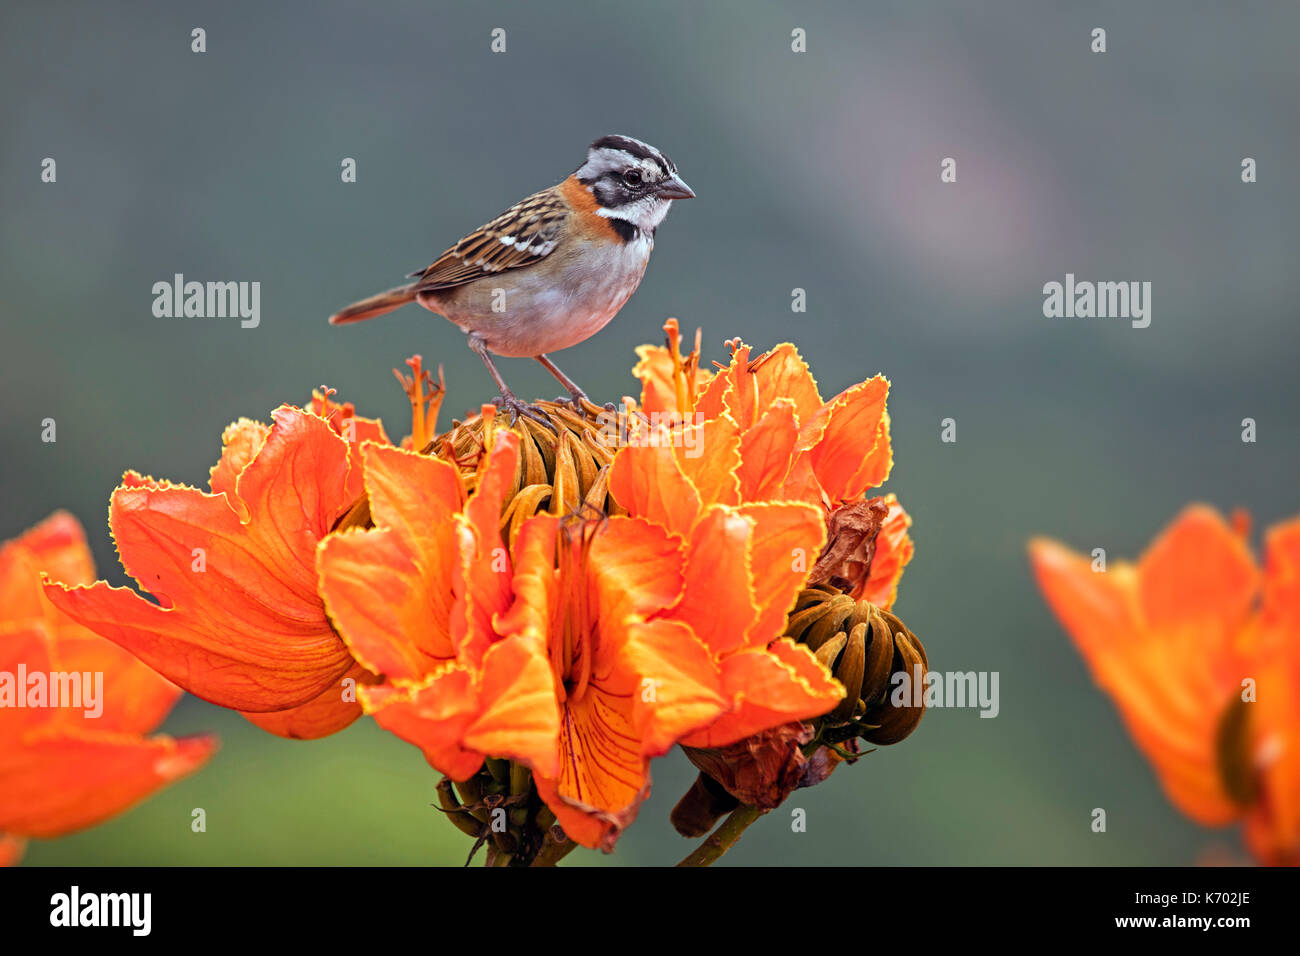 Rufous-collared sparrow (Zonotrichia capensis) on colorful orange flowers, Bolivian Yungas, Nor Yungas Province, La Paz Department of western Bolivia Stock Photo